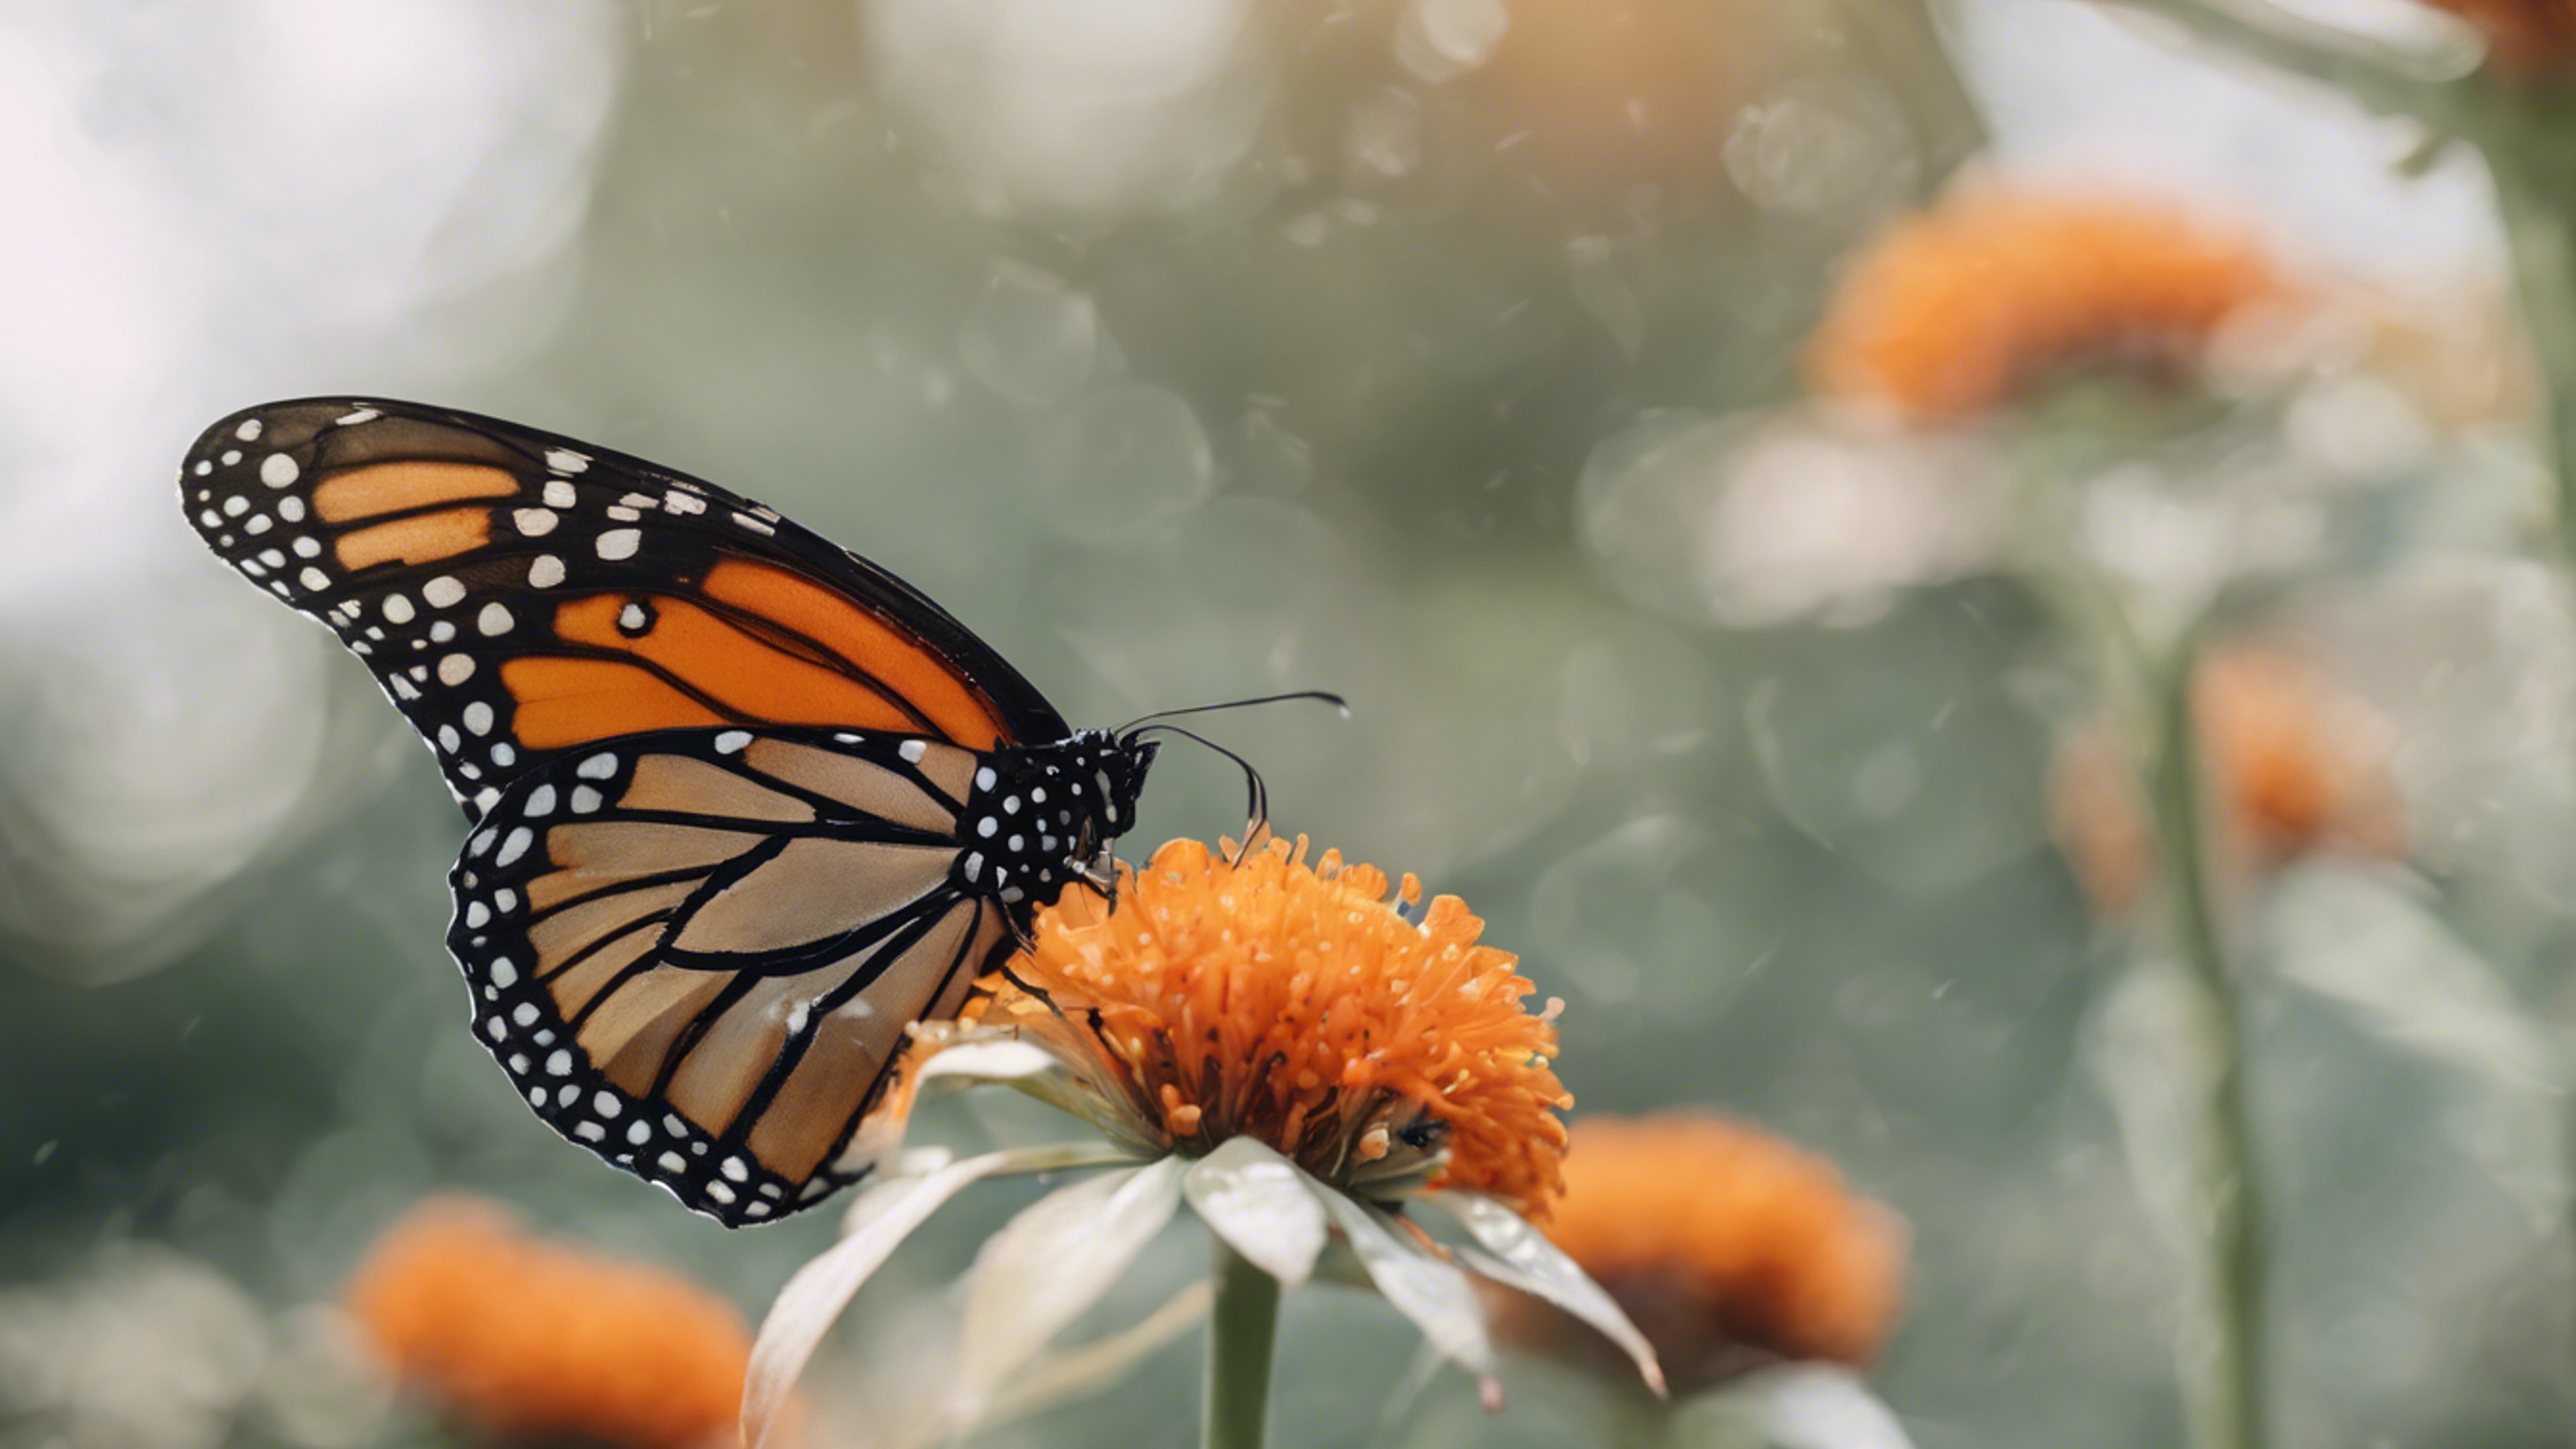 Macro close-up of a black-and-orange monarch butterfly perched on a flower. Wallpaper[56c2f855106d400187c7]